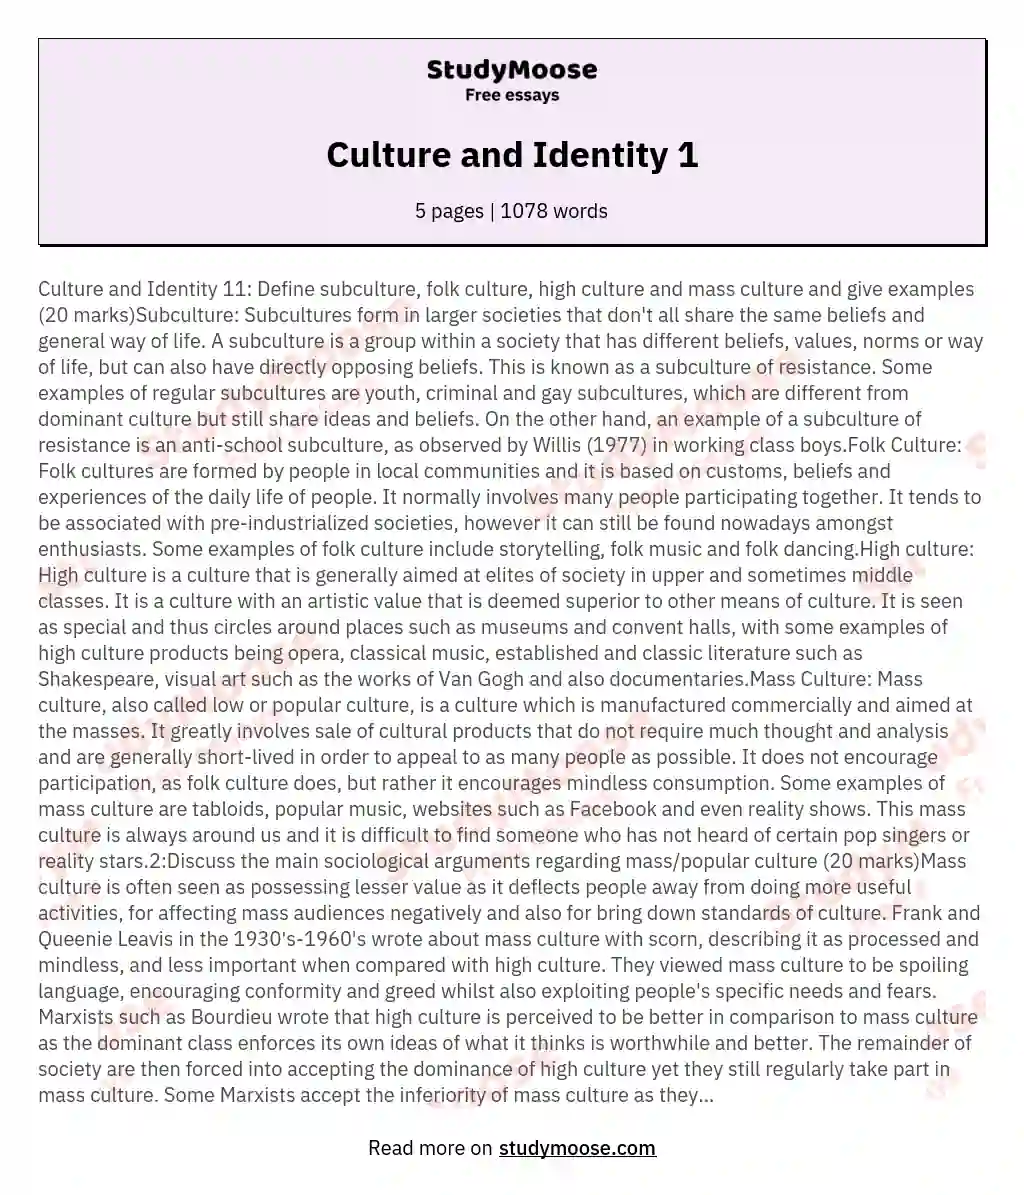 Culture and Identity 1 essay